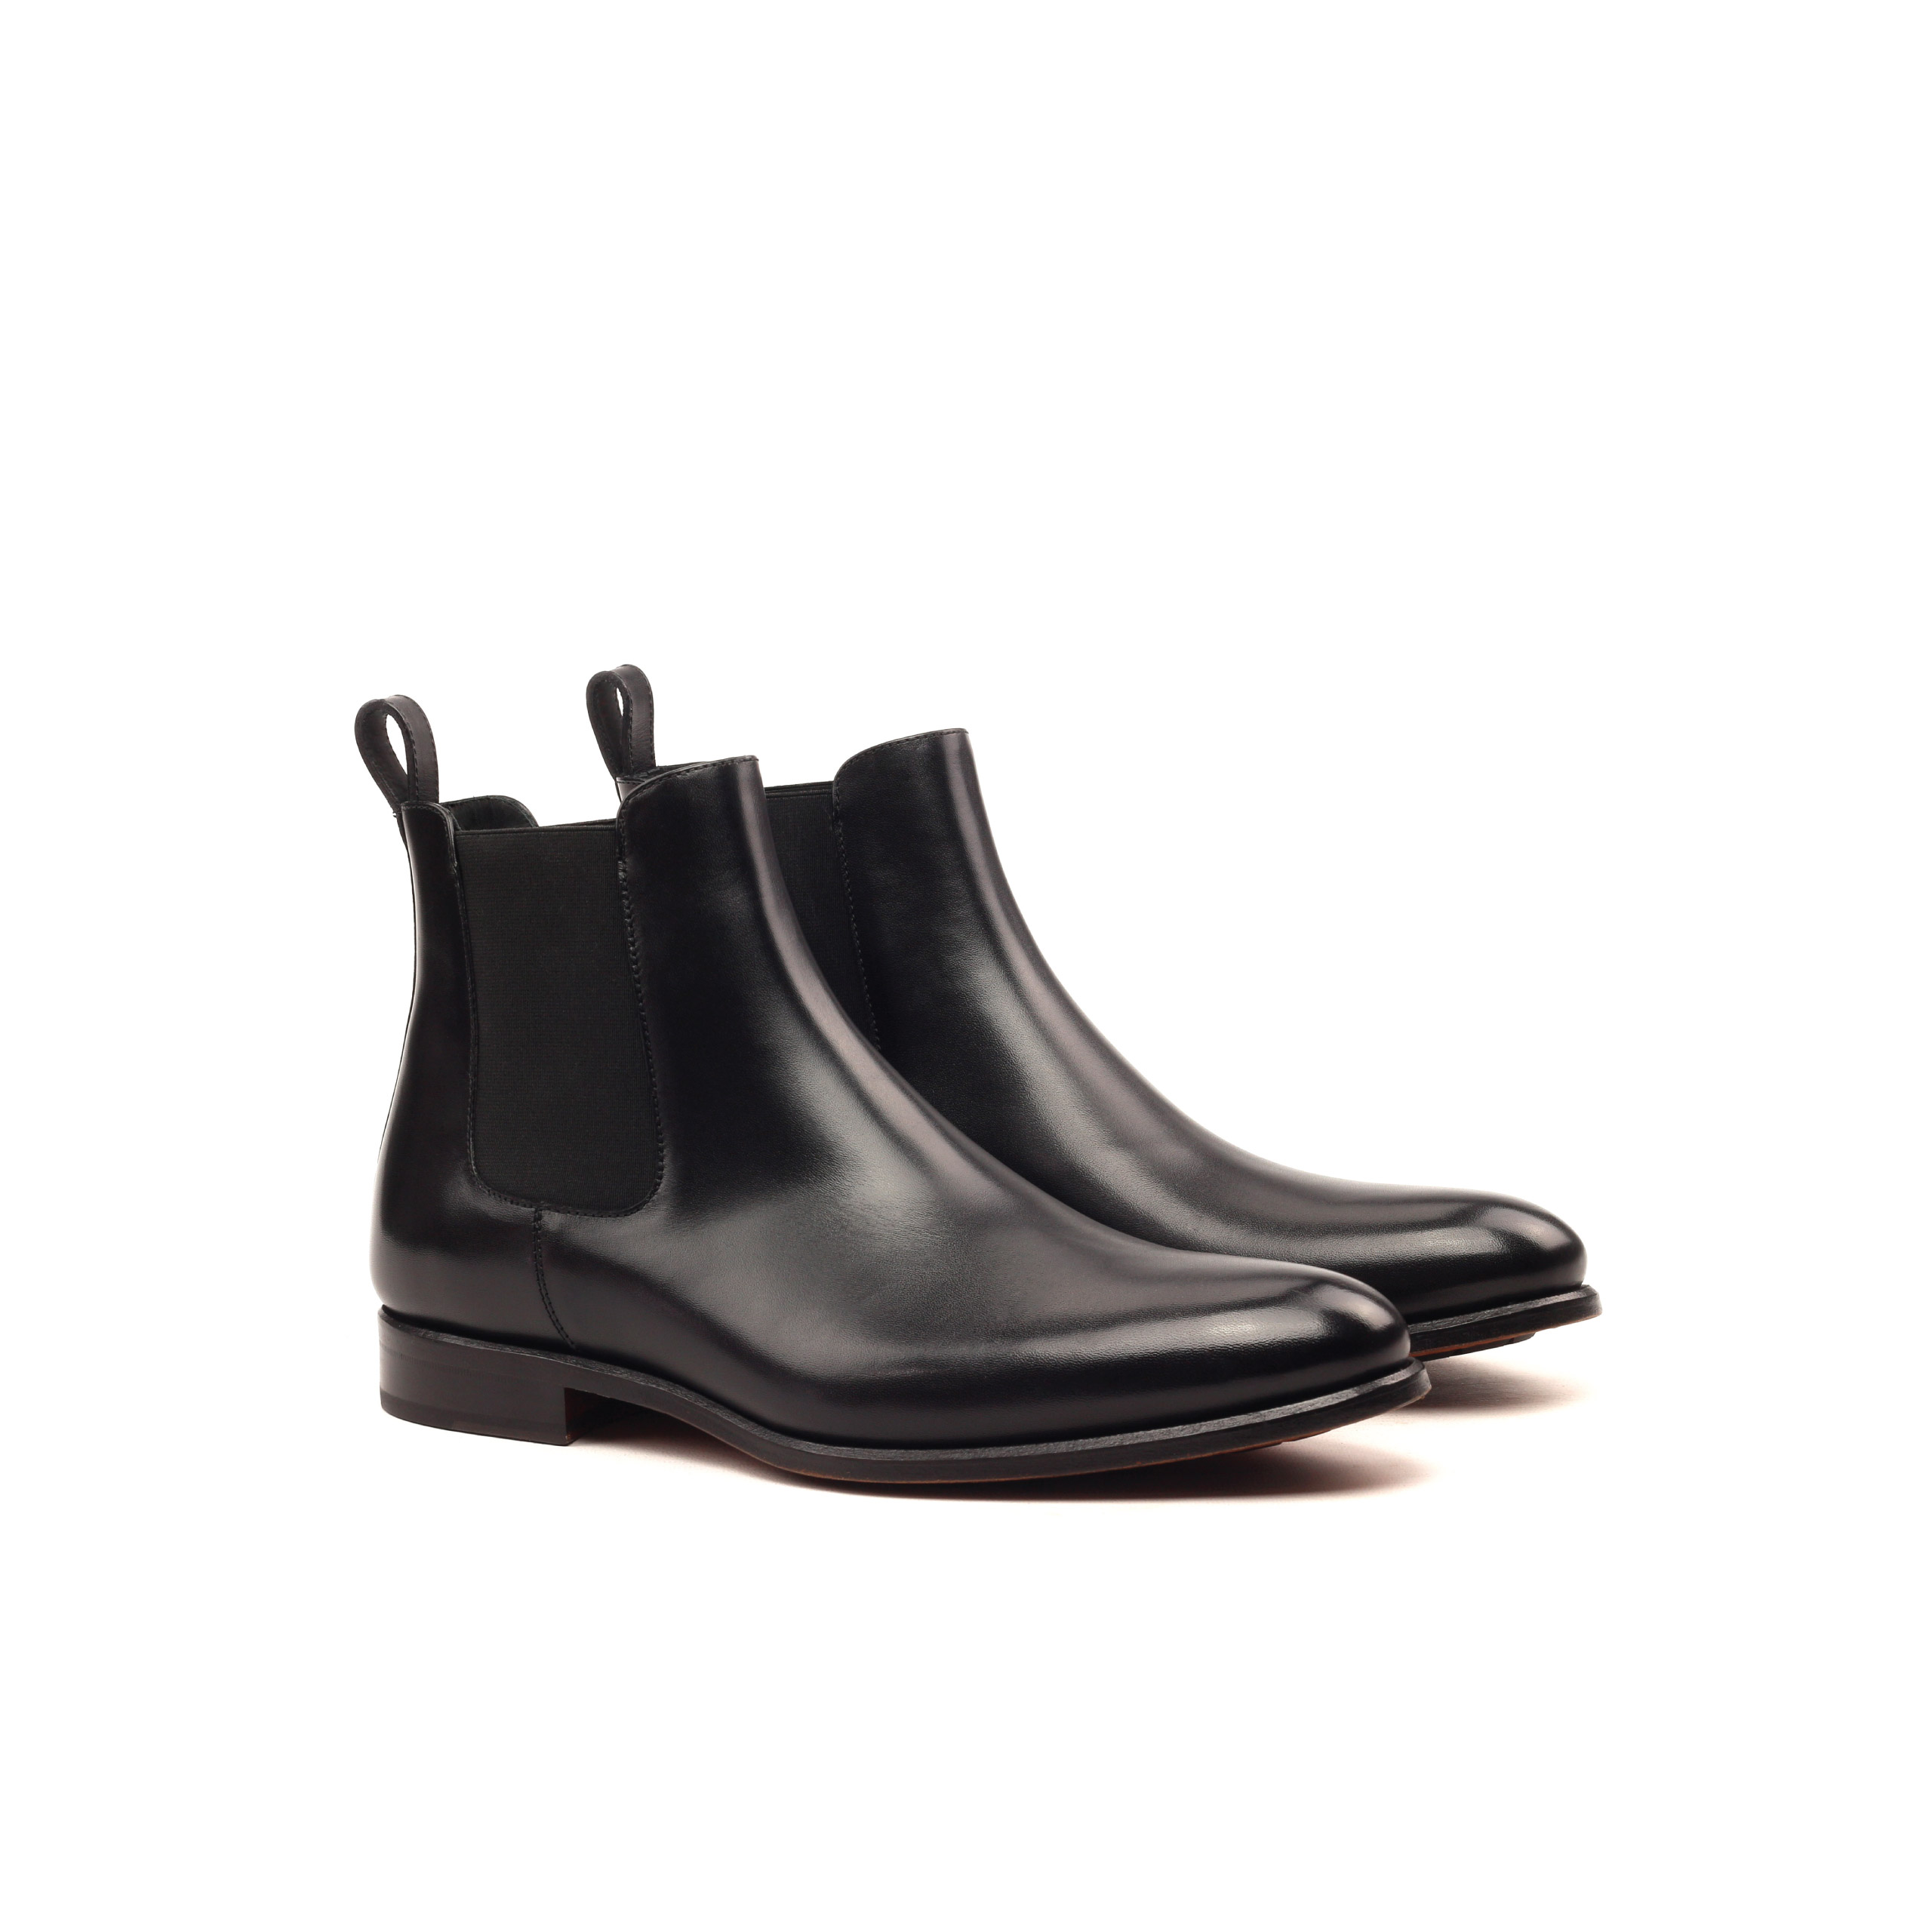 People of The Seine Box Calf Dress Chelsea Boots